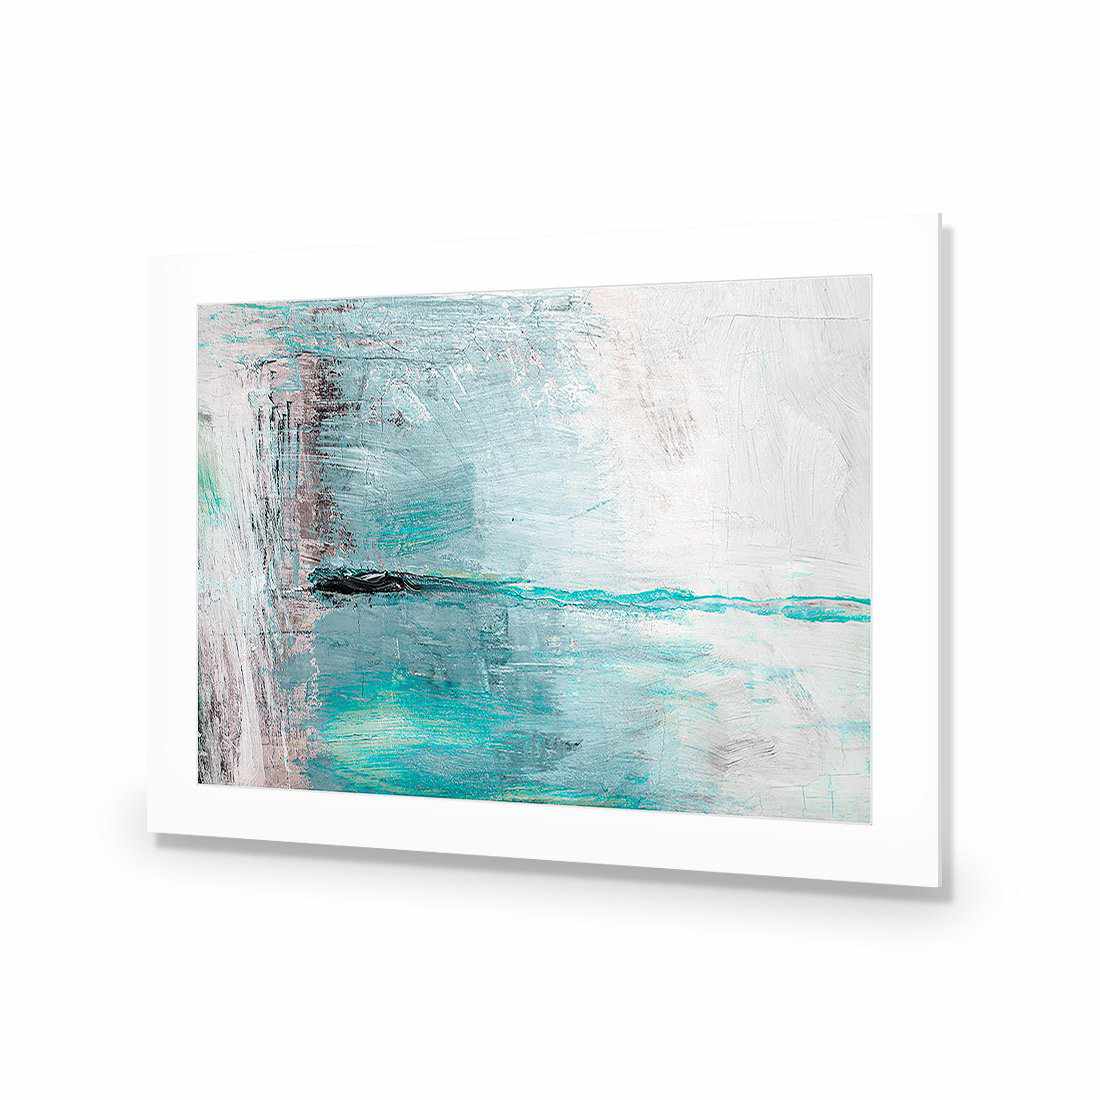 Painting The Sky-Acrylic-Wall Art Design-With Border-Acrylic - No Frame-45x30cm-Wall Art Designs